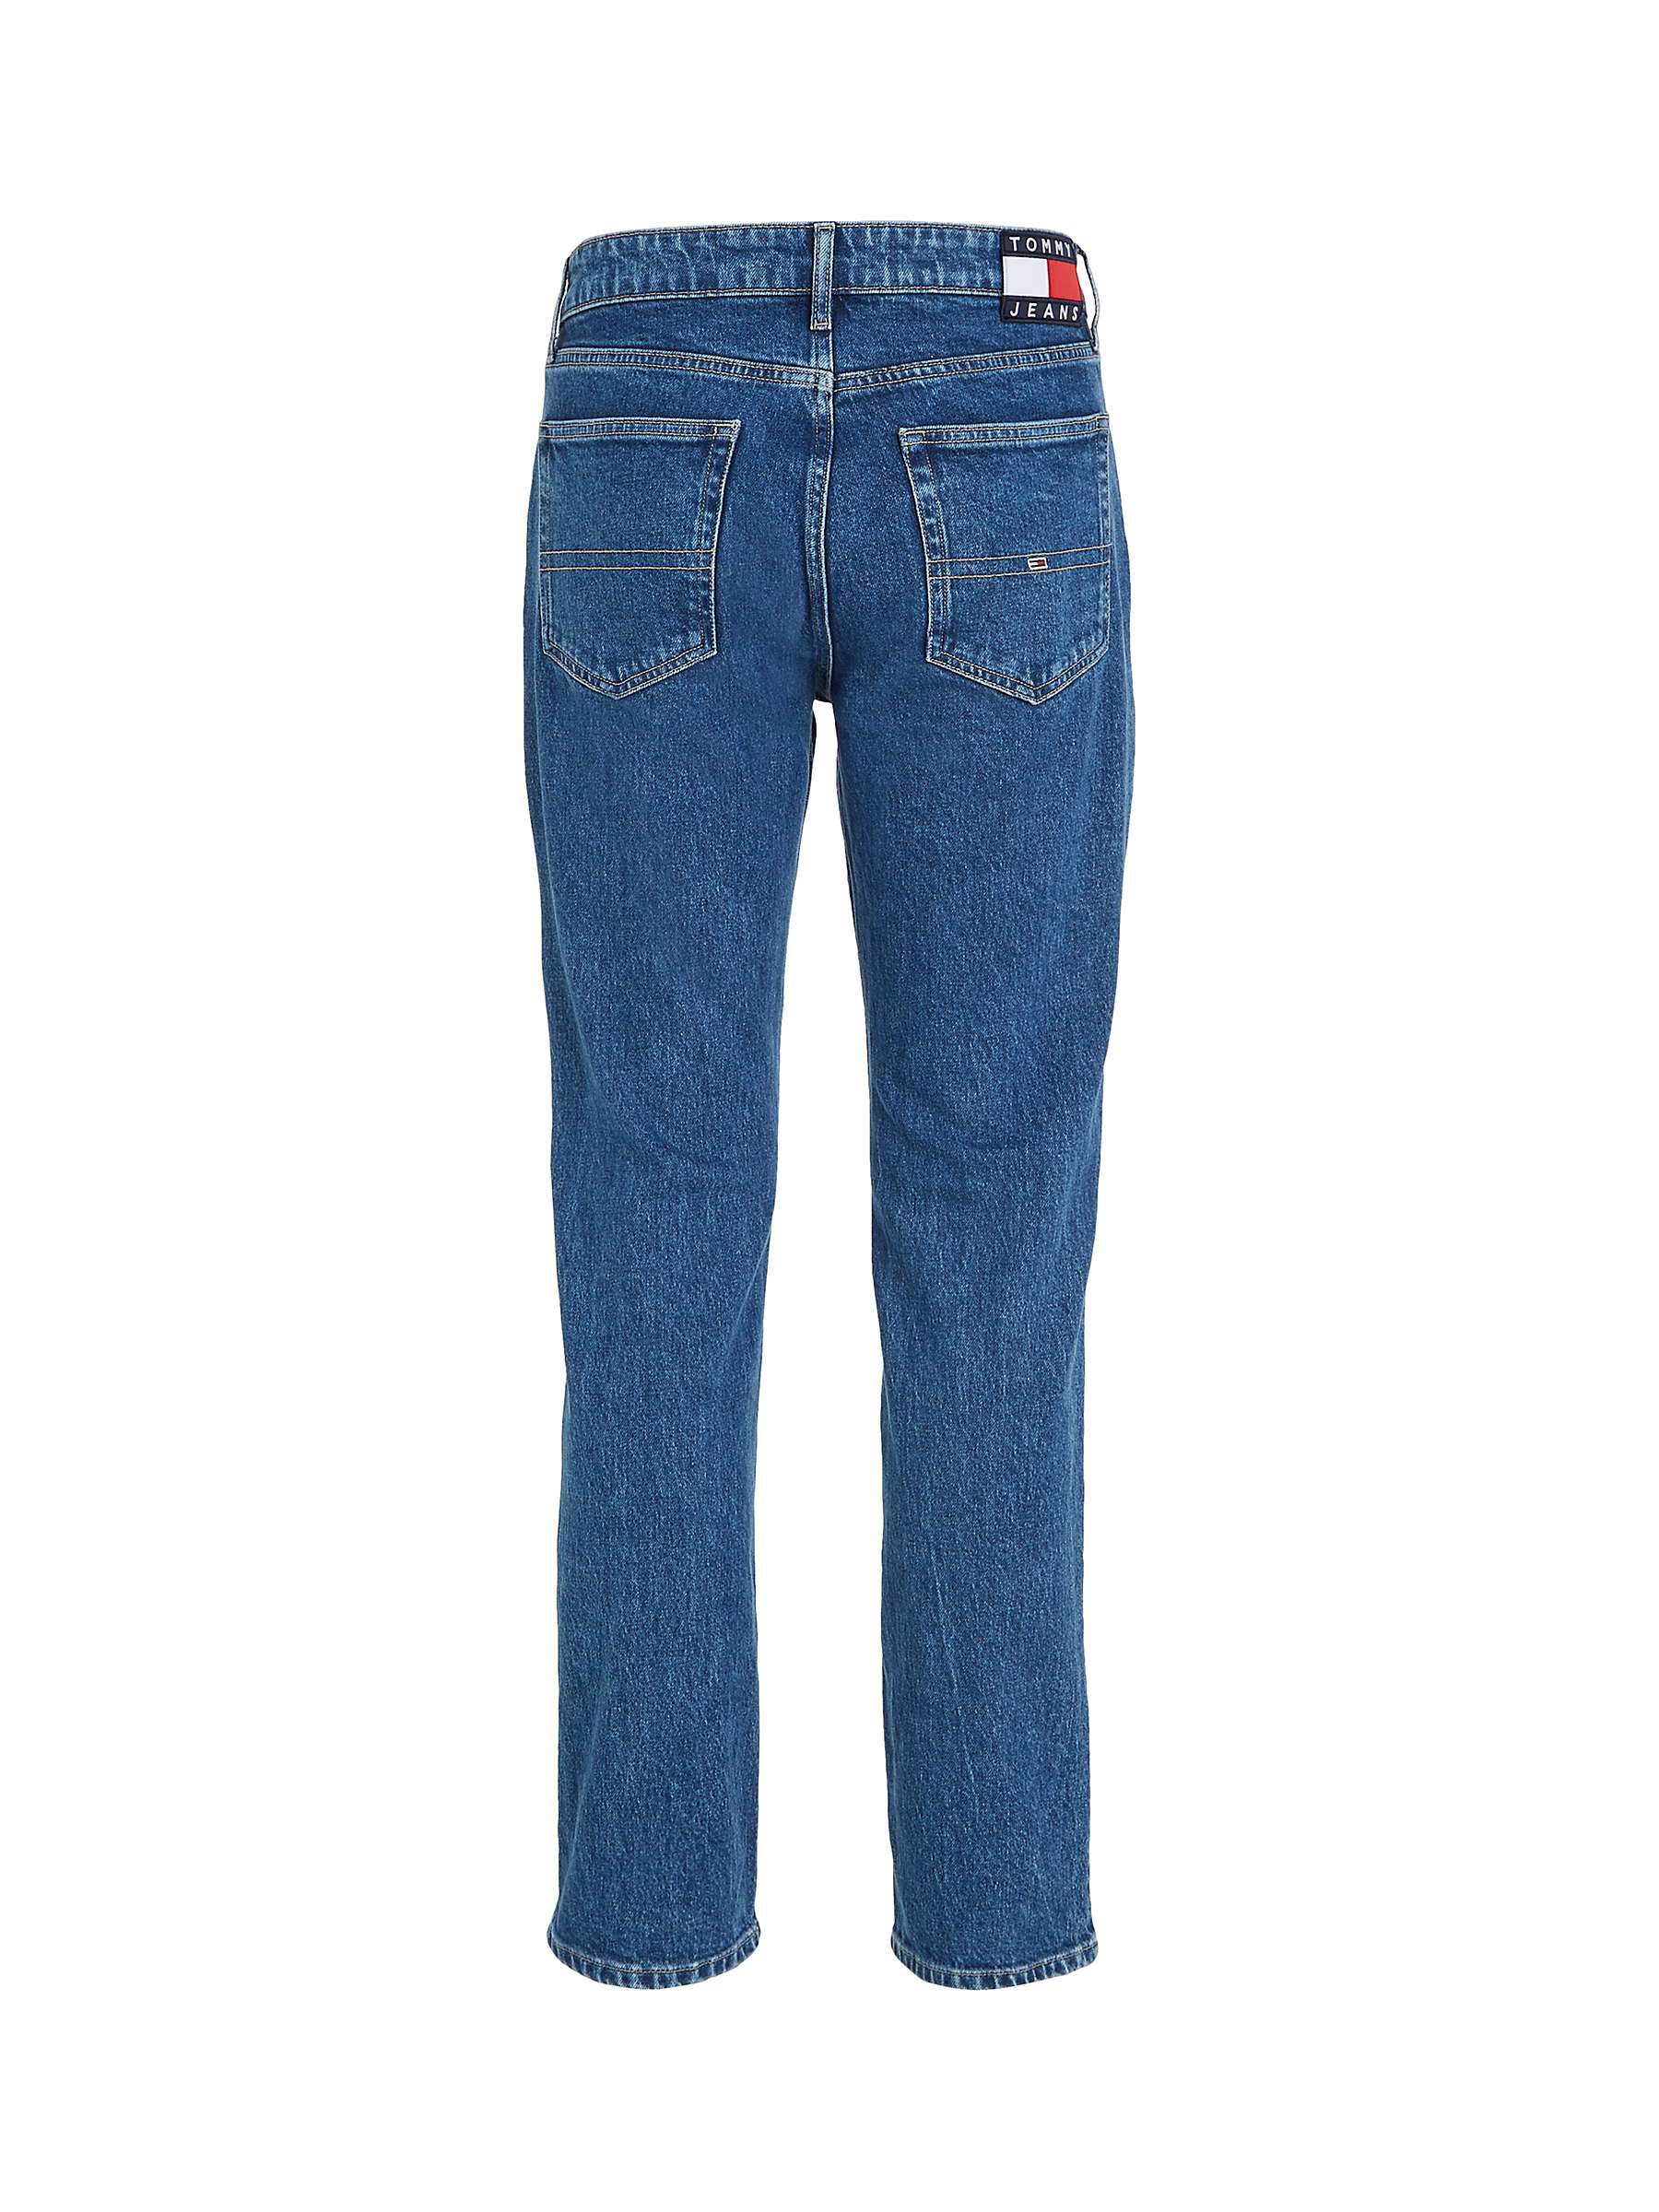 Buy Tommy Jeans Ryan Straight Jeans Online at johnlewis.com